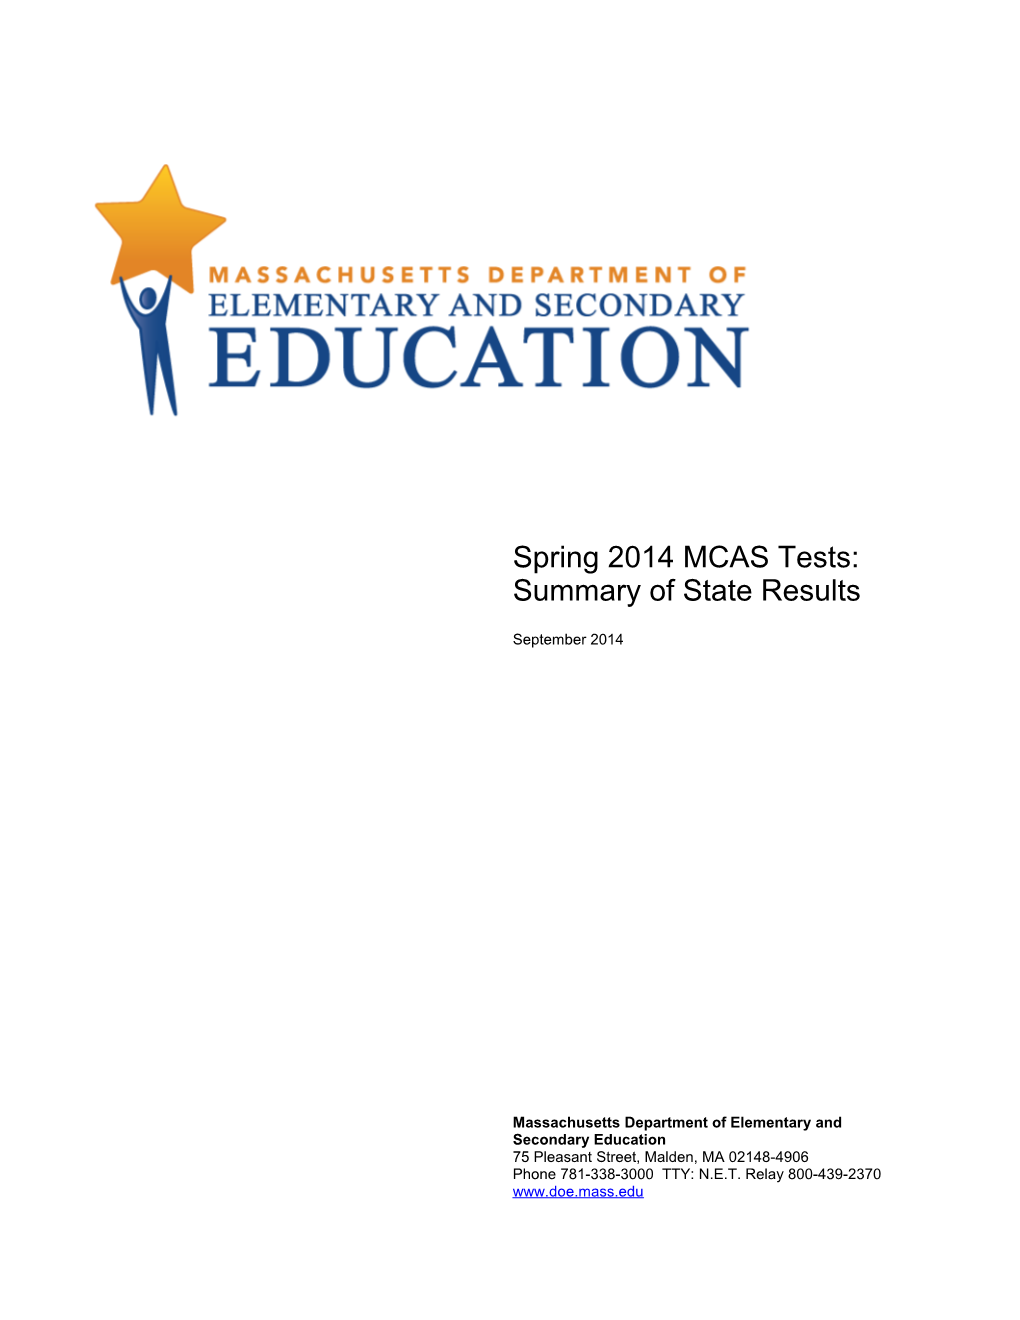 Spring 2014 MCAS Tests: Summary of State Results